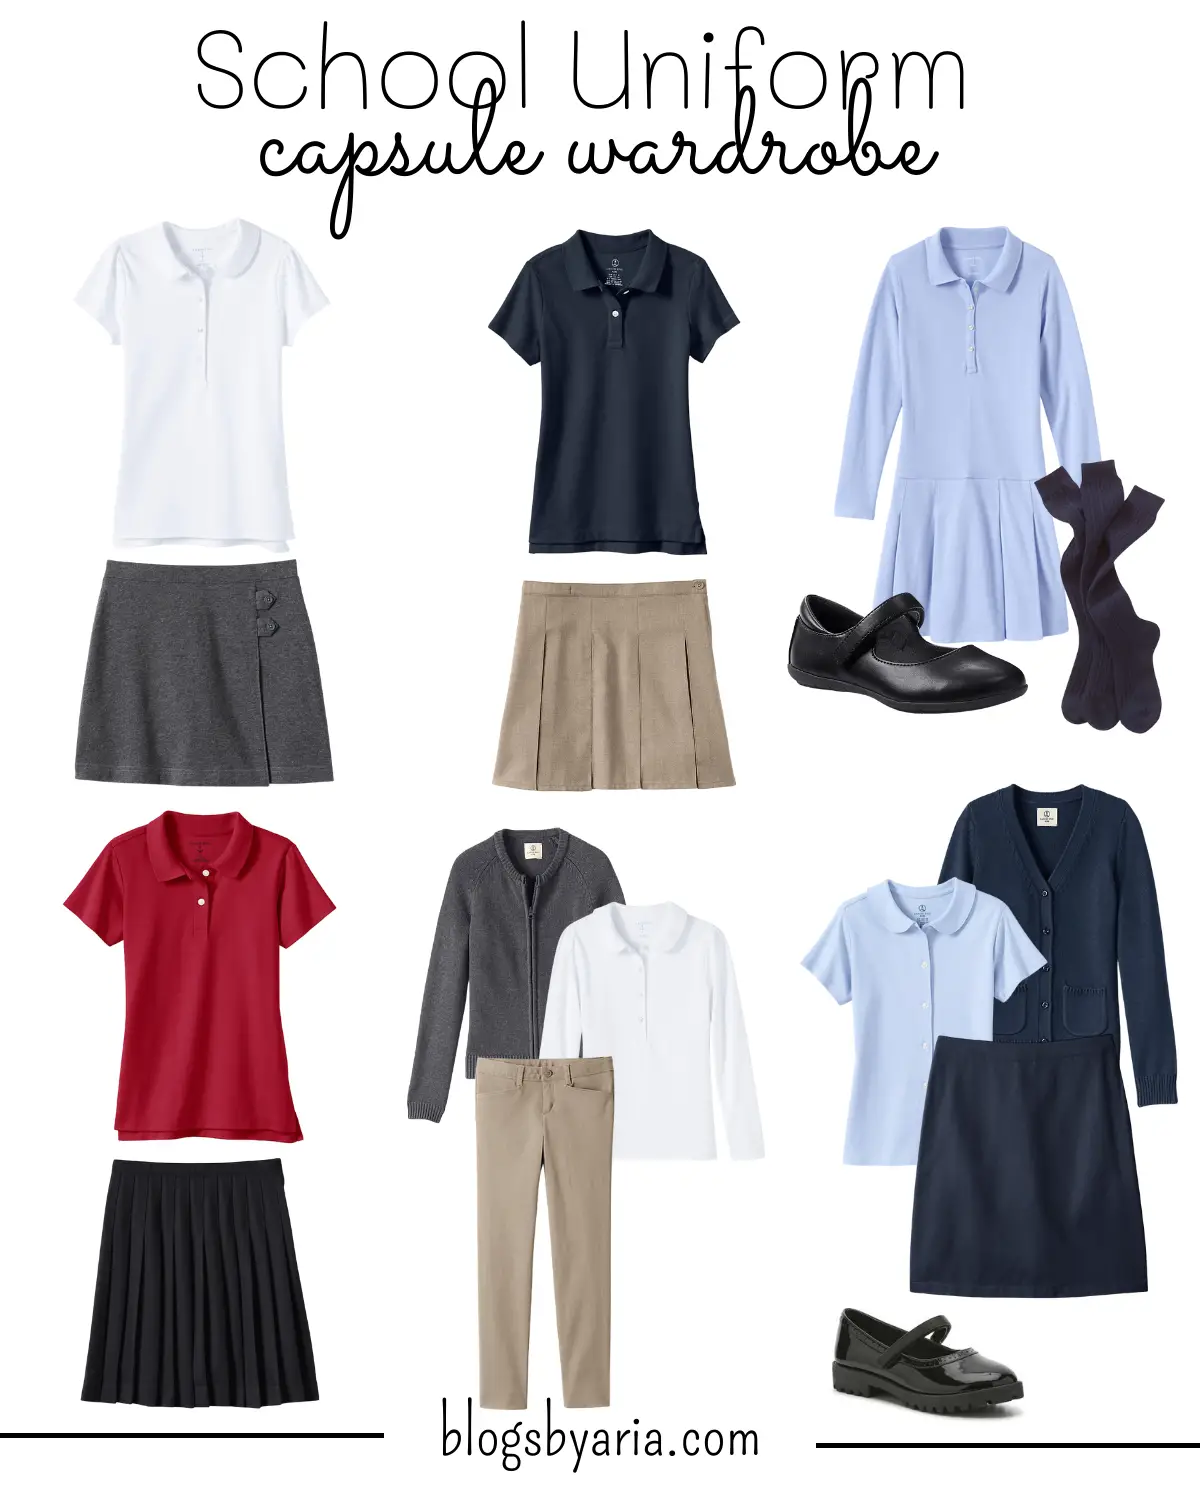 ultimate back to school shopping guide back to school uniforms for girls capsule wardrobe